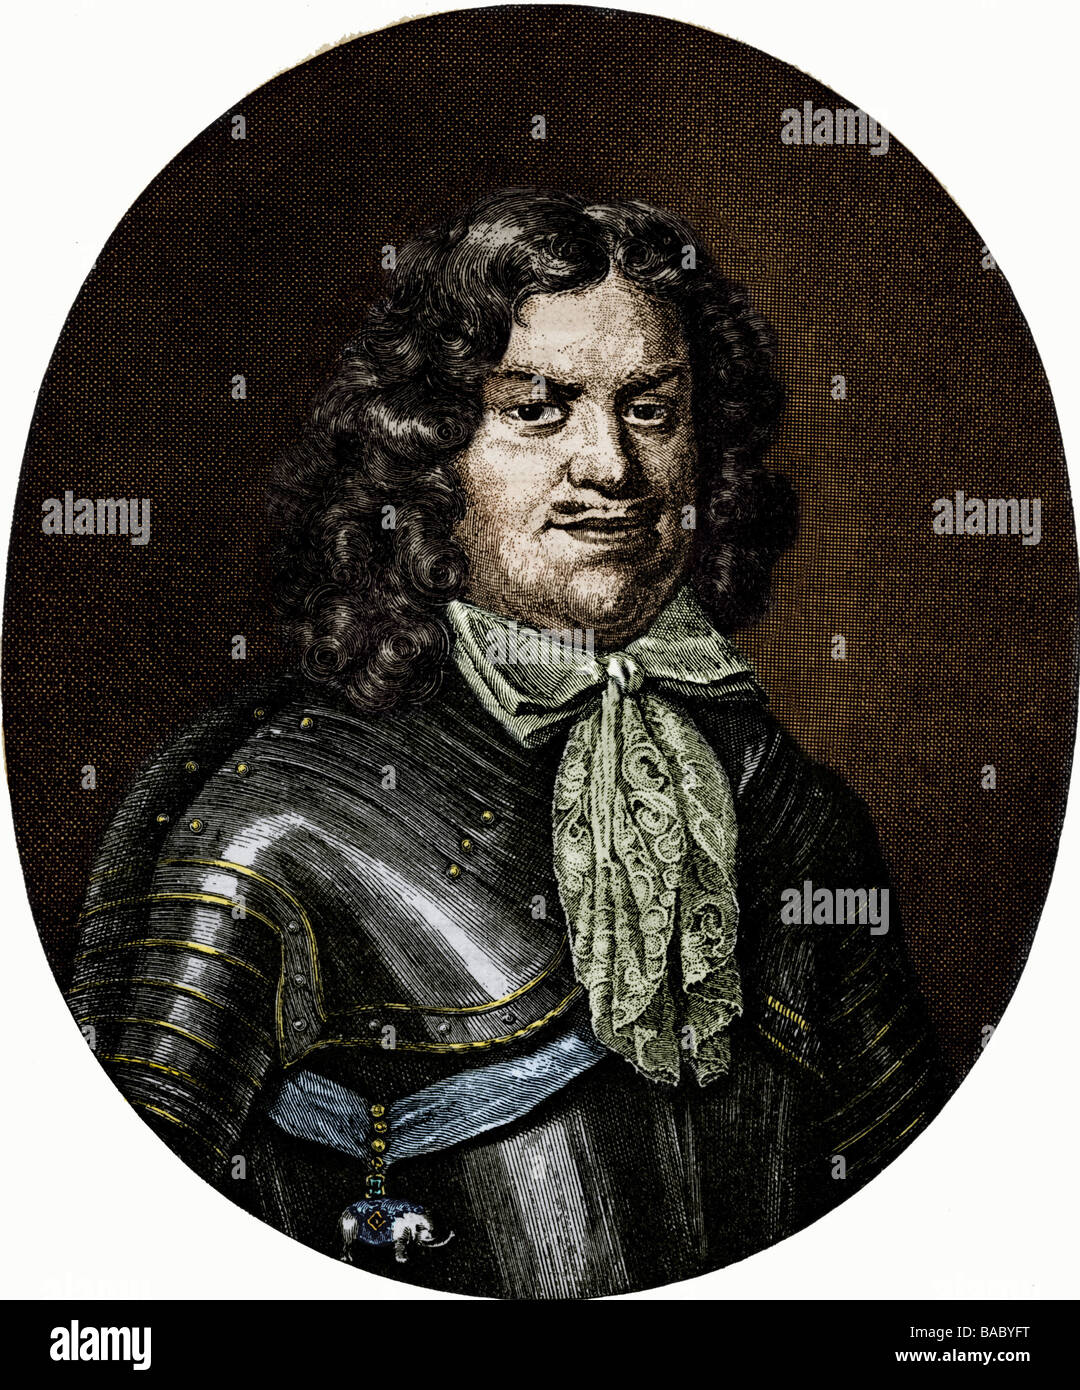 John George III, 30.6.1647 - 12.9.1691, Elector of Saxony 1.9.1680 - 12.9.1691, portrait, after copper engraving by J. Gole, 17th century, later coloured, Artist's Copyright has not to be cleared Stock Photo